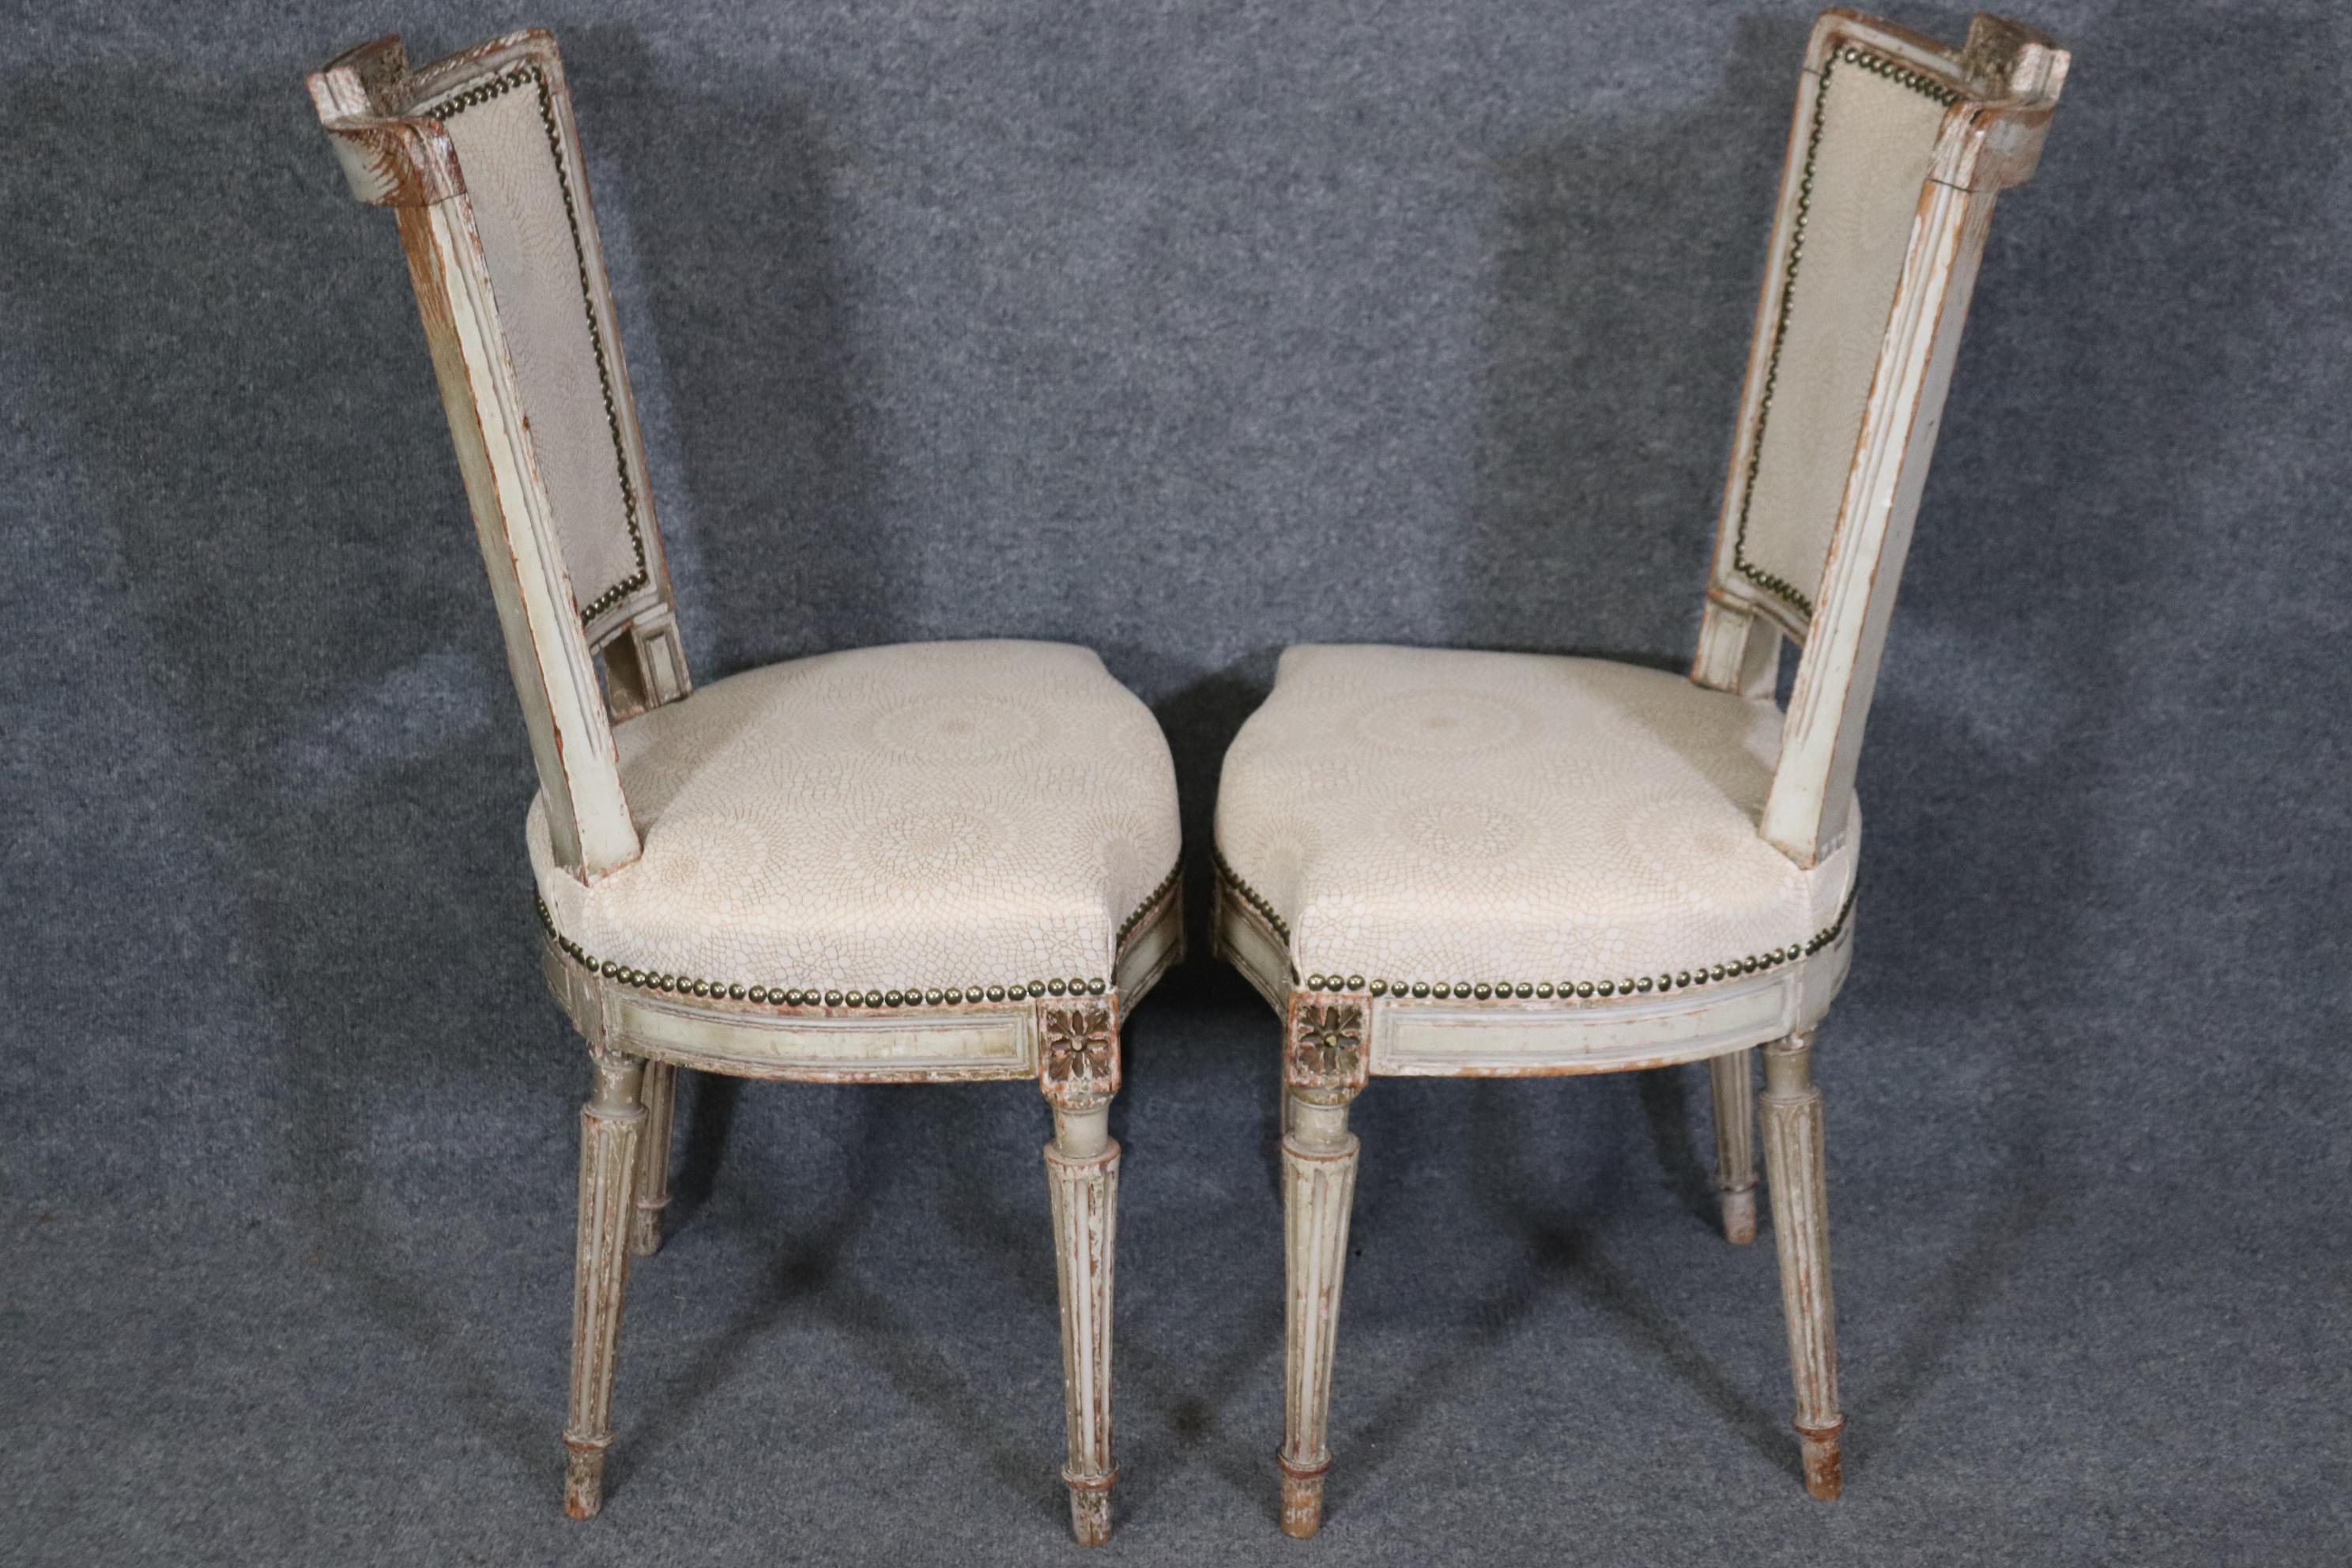 Early 20th Century Rare Set of 12 Distressed Paint Decorated Maison Jansen Dining Chairs Circa 1920